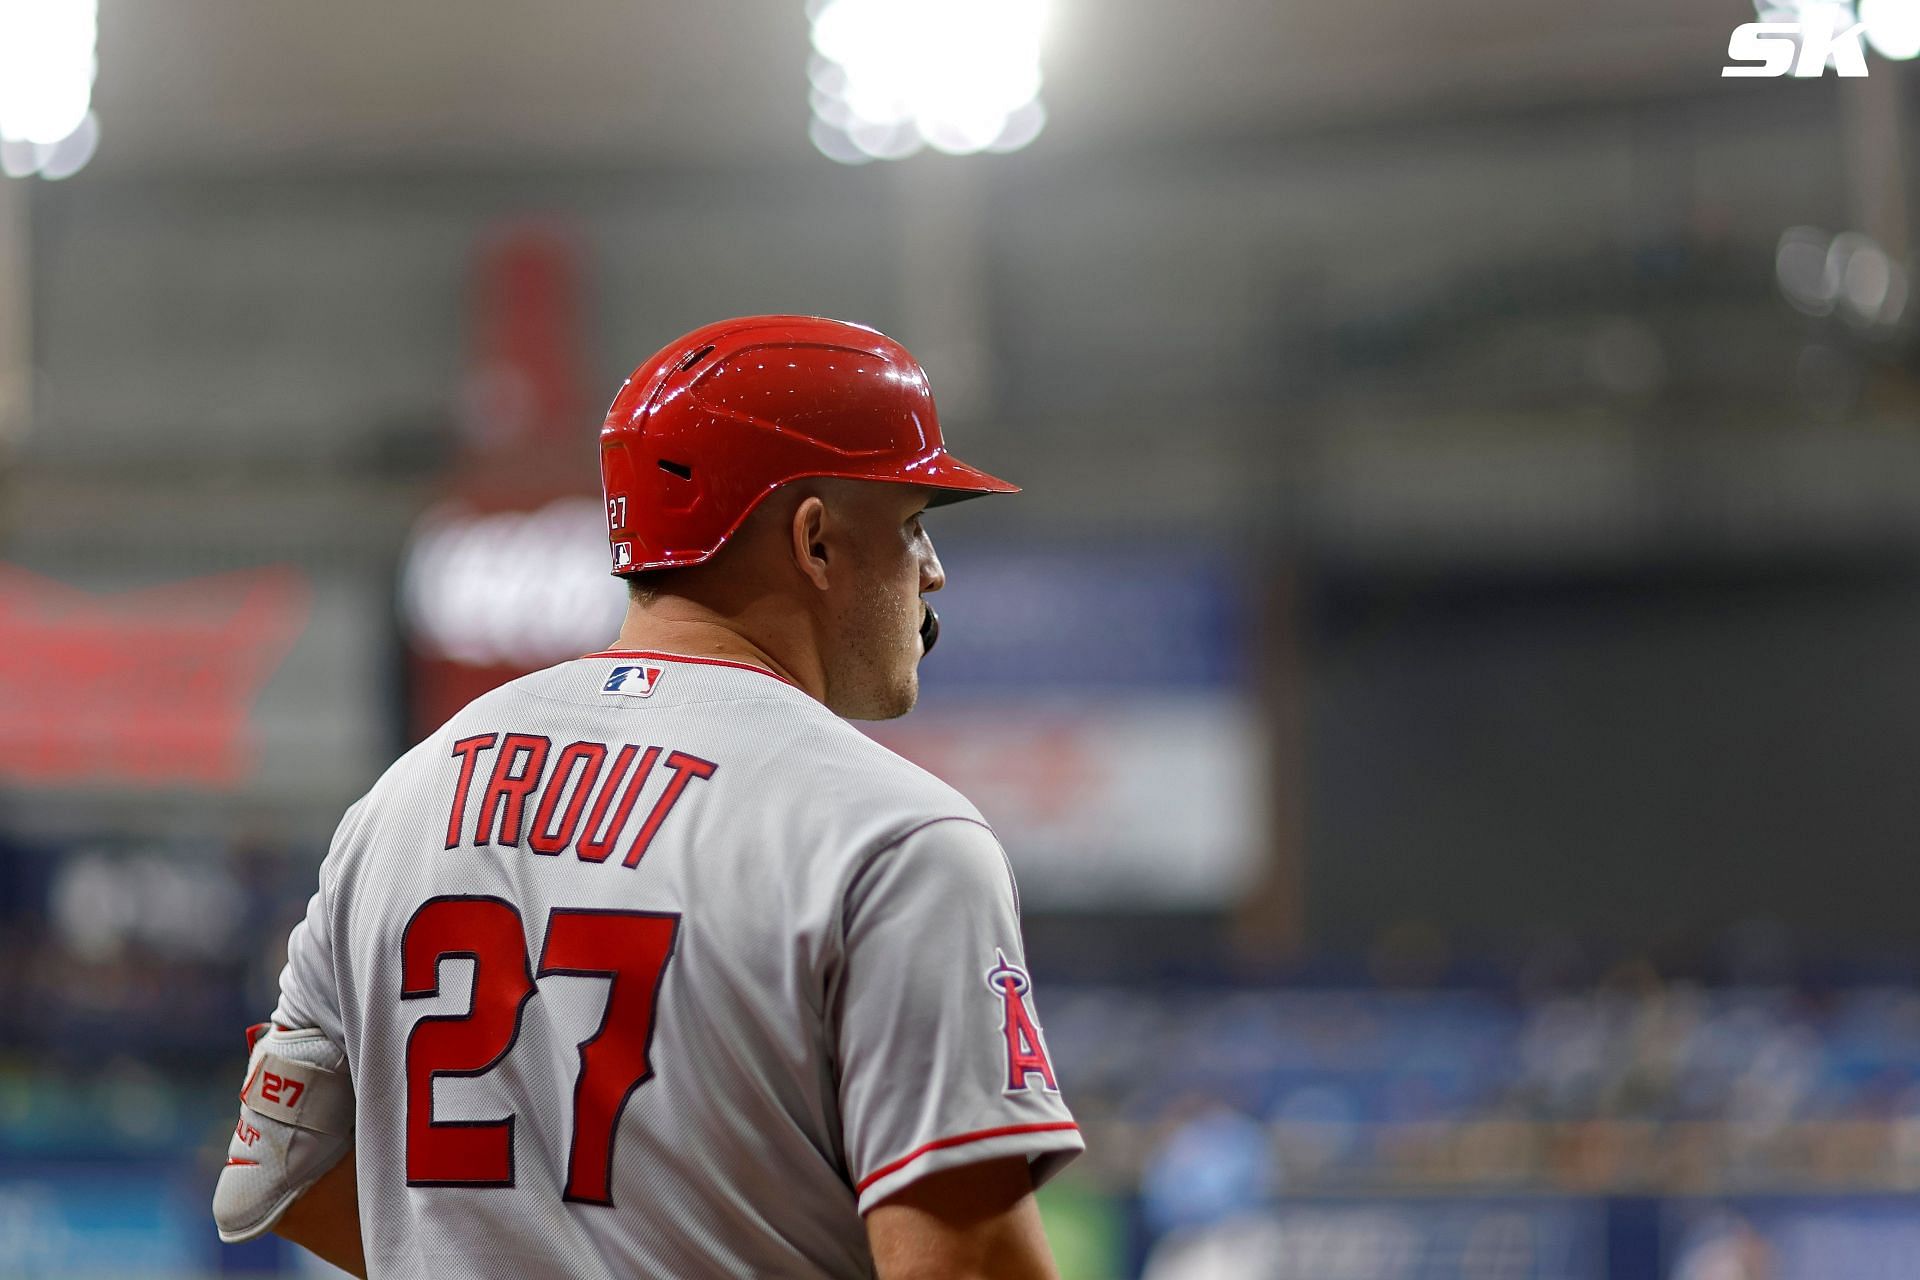 Analyst Xavier Scruggs sad over Mike Trout